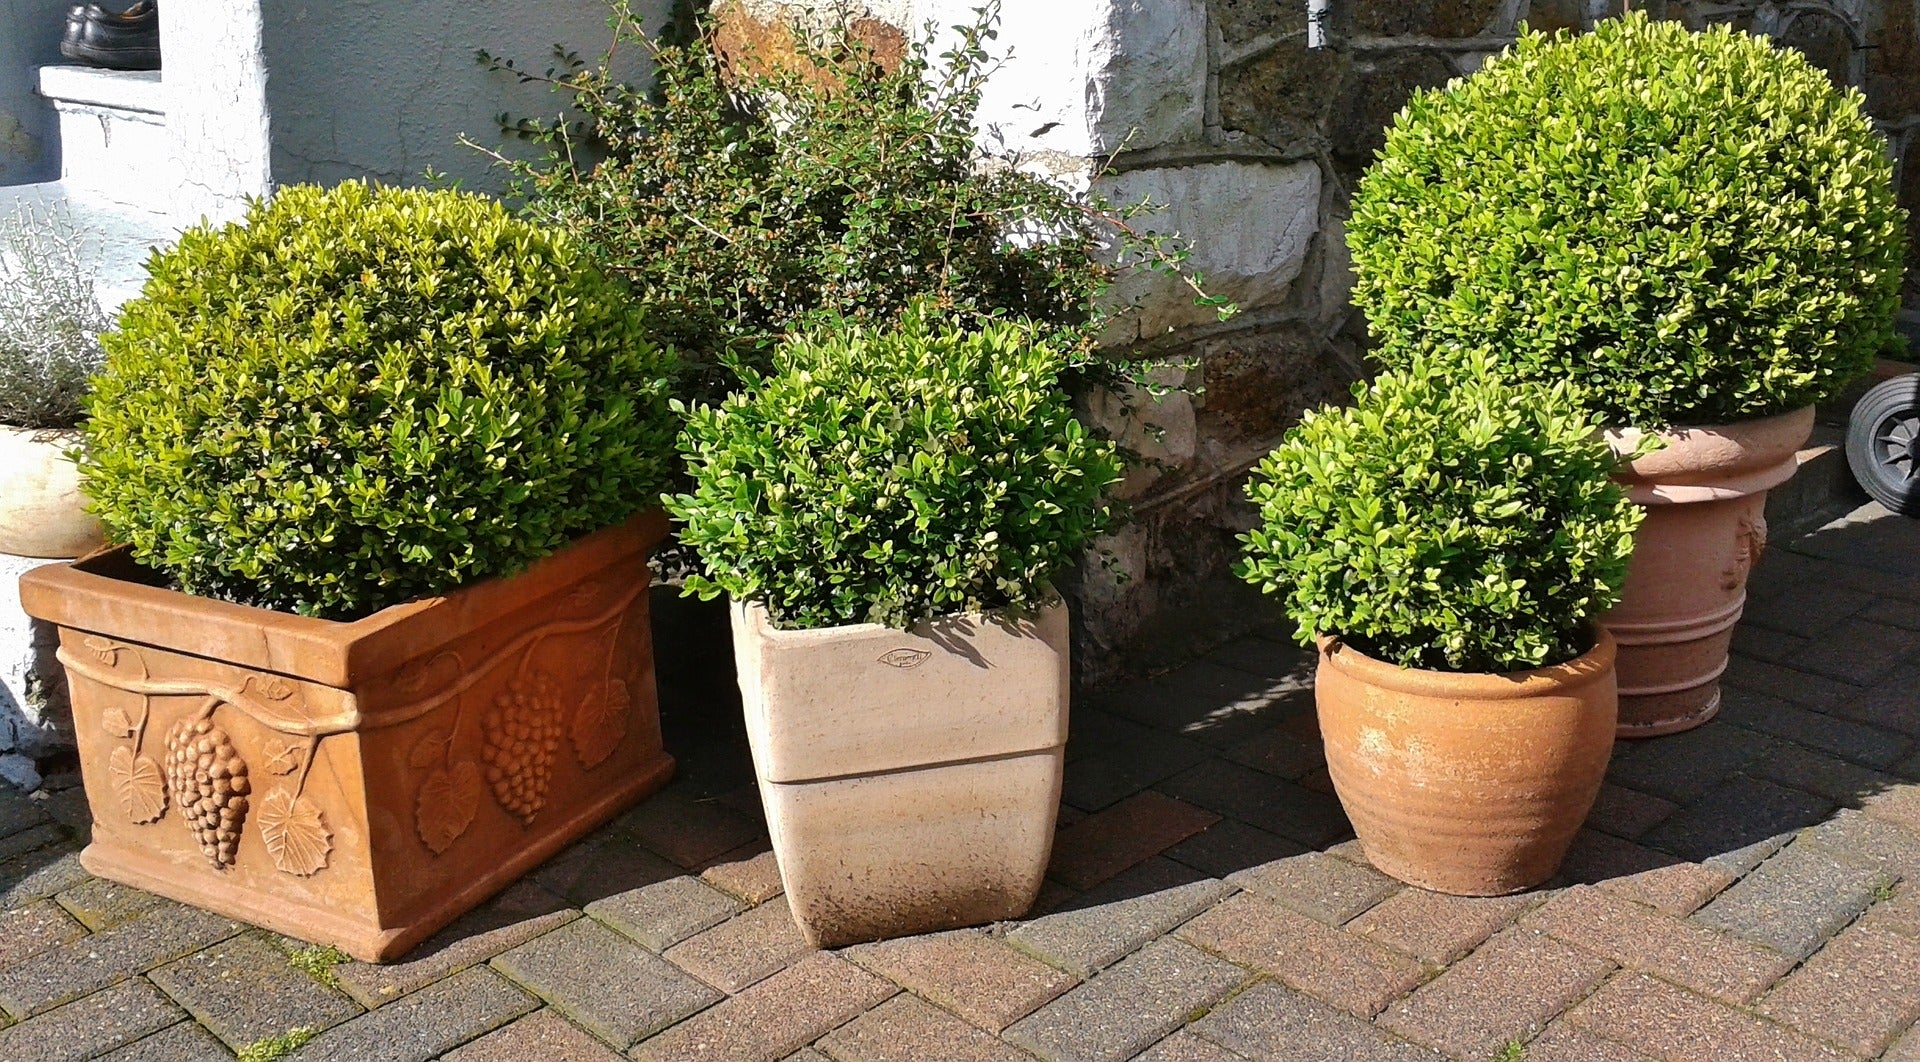 Green Velvet Boxwood used in containers